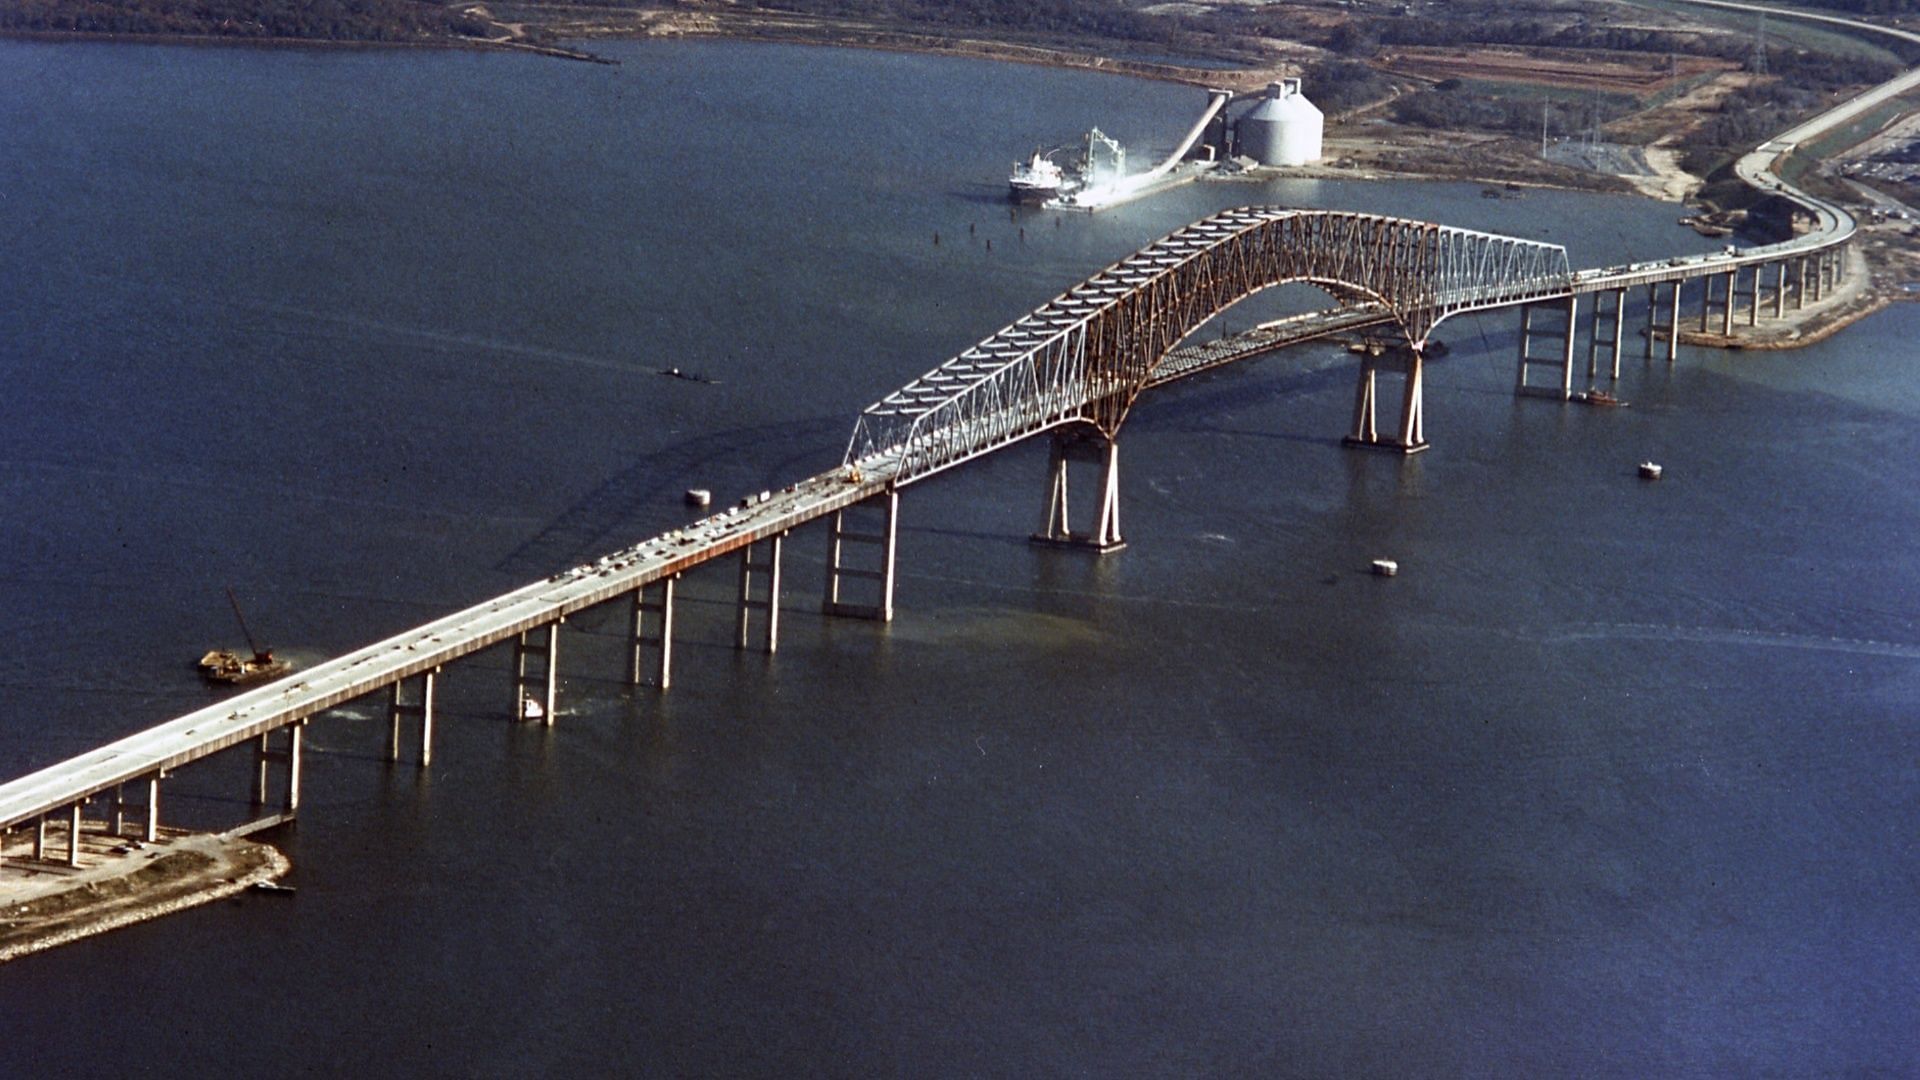 A Baltimore port worker claims that the Dali had power issues days before cashing into the Francis Scott Key Bridge (Image via Fickr/Maryland Transportation Authority)